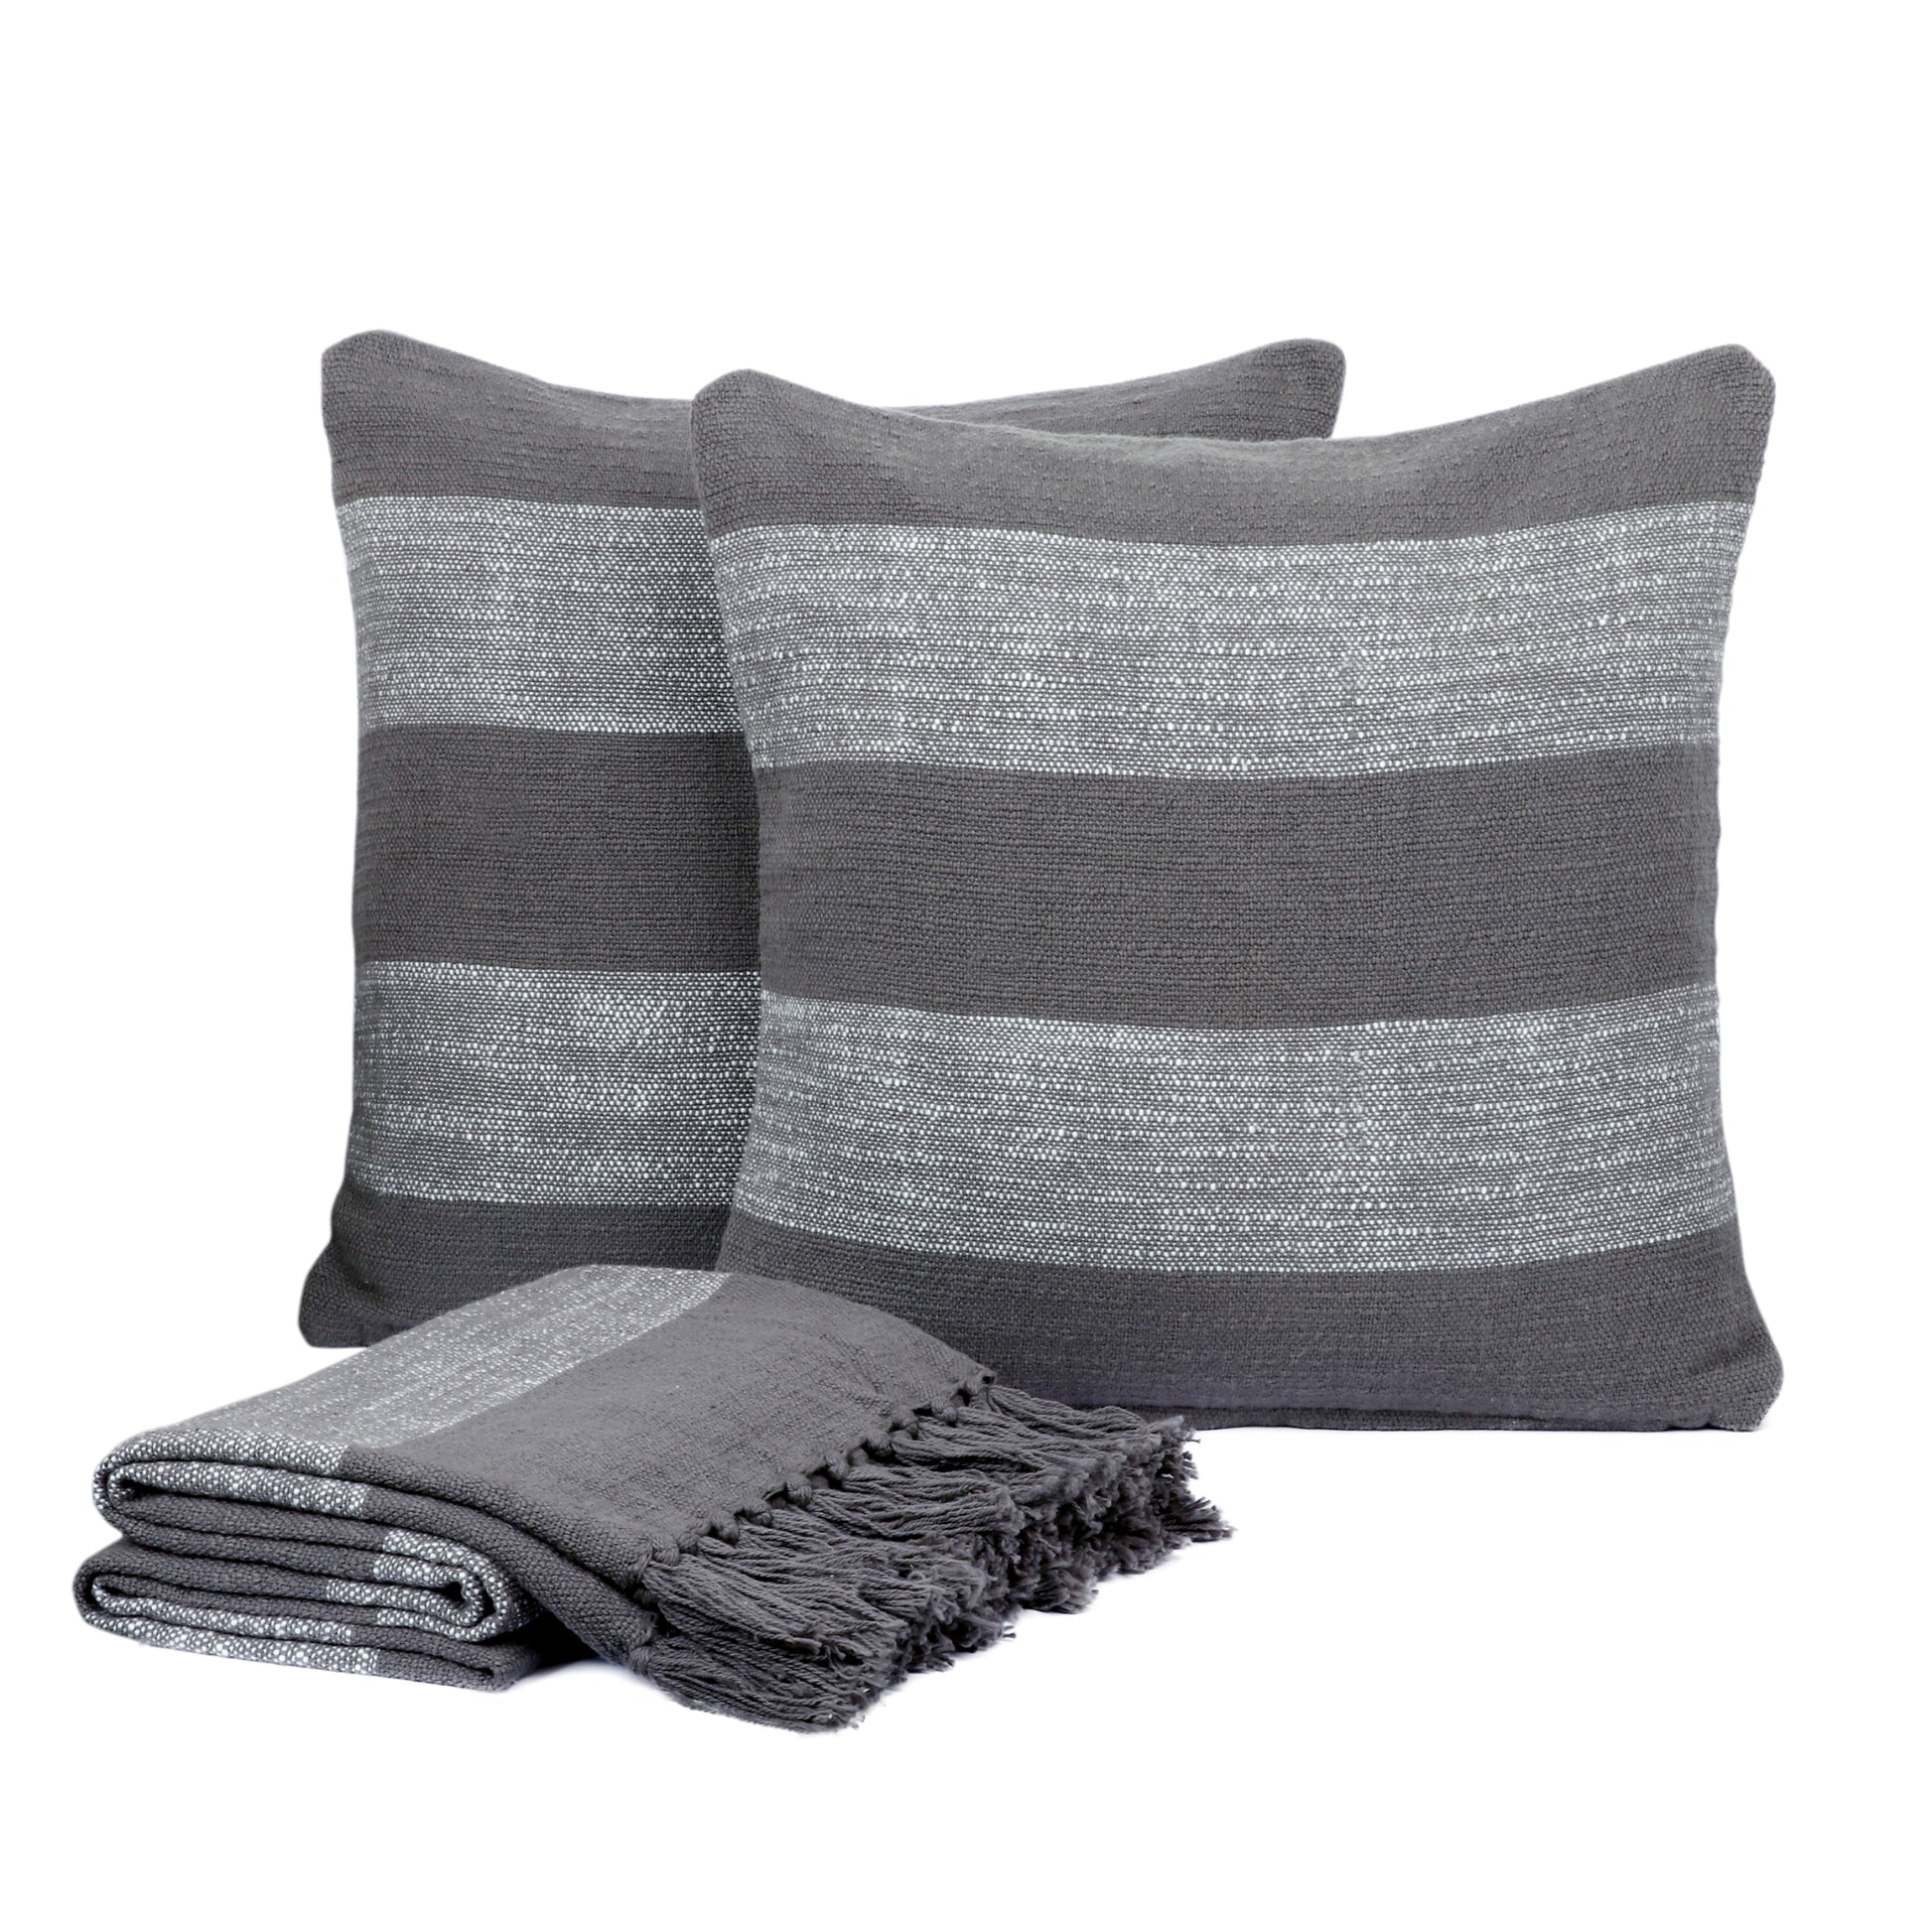 Combo Deal - Stripe design - Cotton throw blanket and pillow cases - TreeWool Bundle Deal#color_charcoal